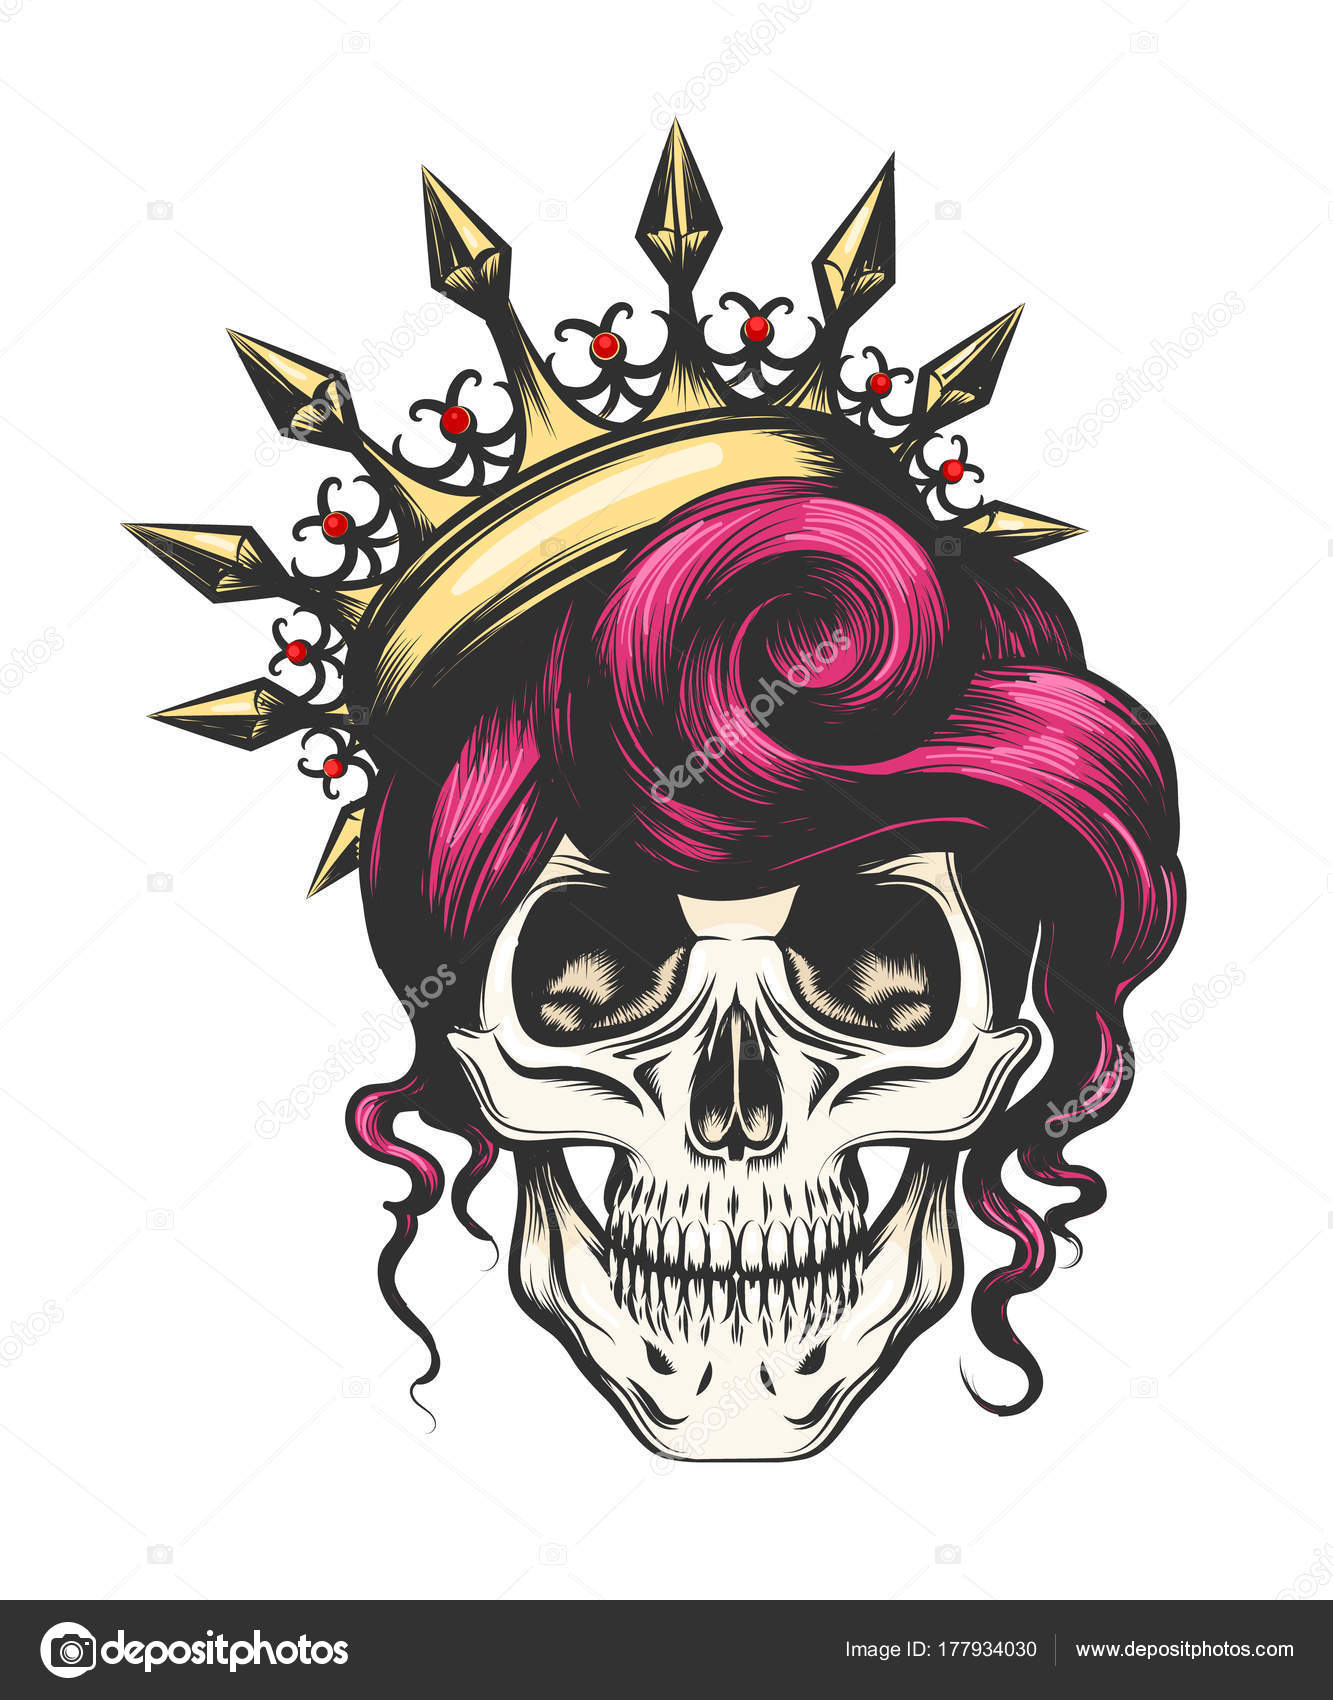 Download Female skull and roses tattoos | Female Skull in Crown ...